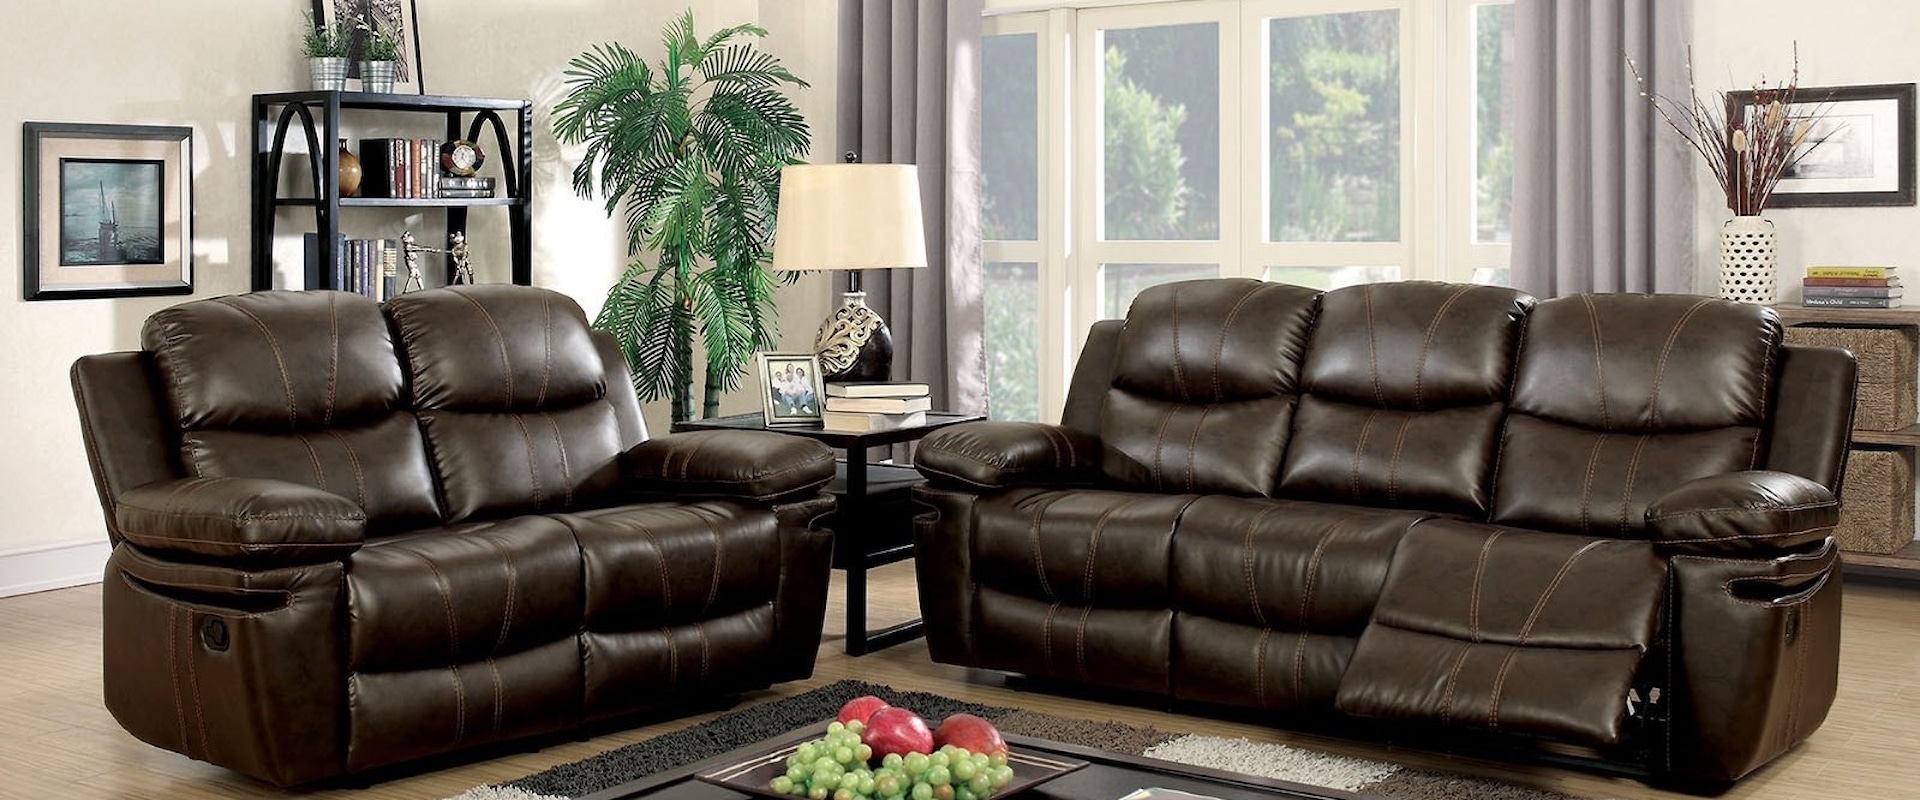 Transitional 3 Piece Reclining Living Room Set with Plush Cushions